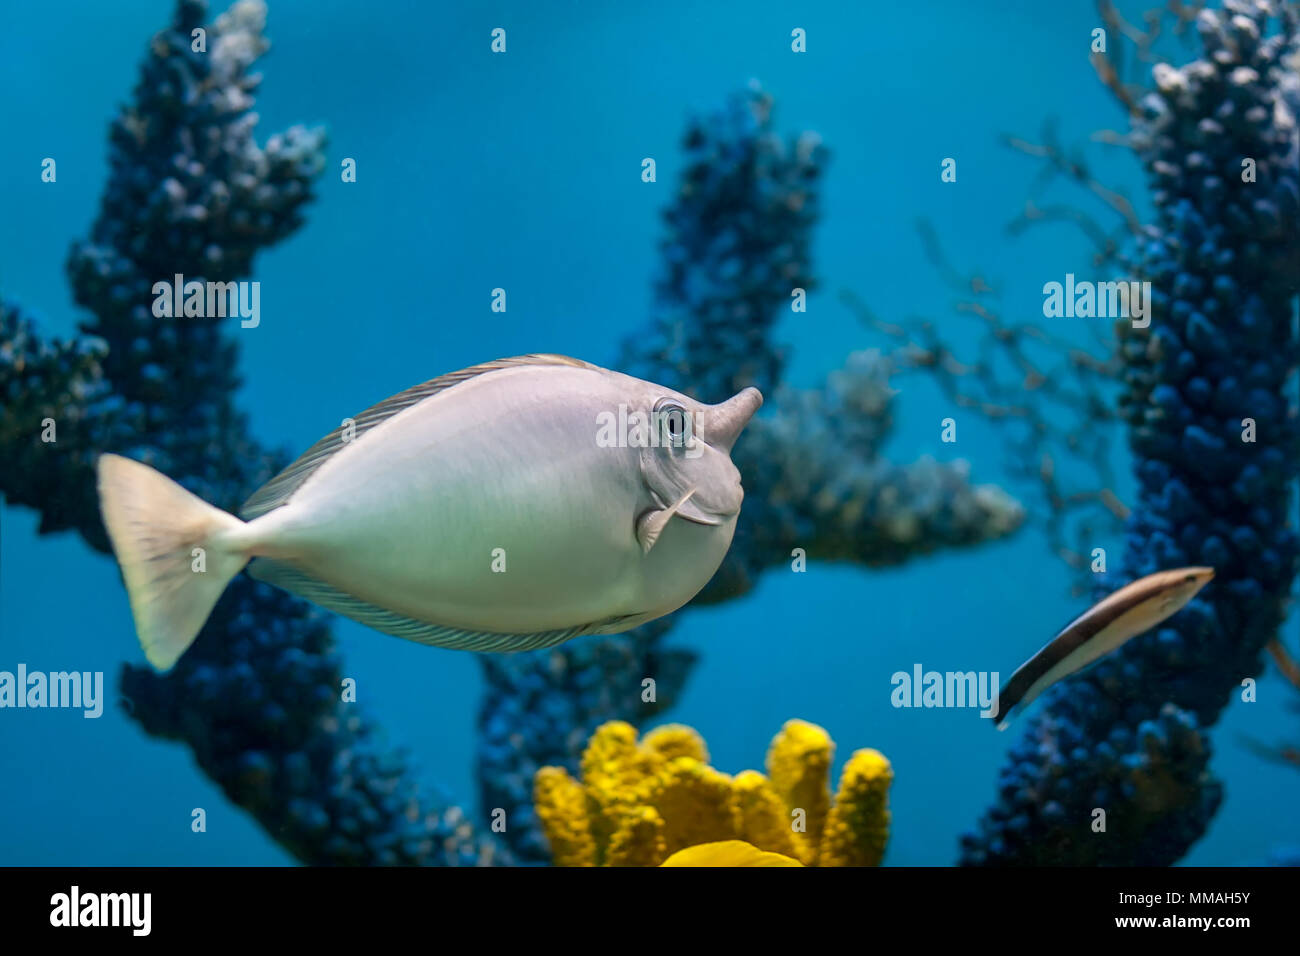 Unicorn fish following a cleaner wrasse in an aquarium Stock Photo